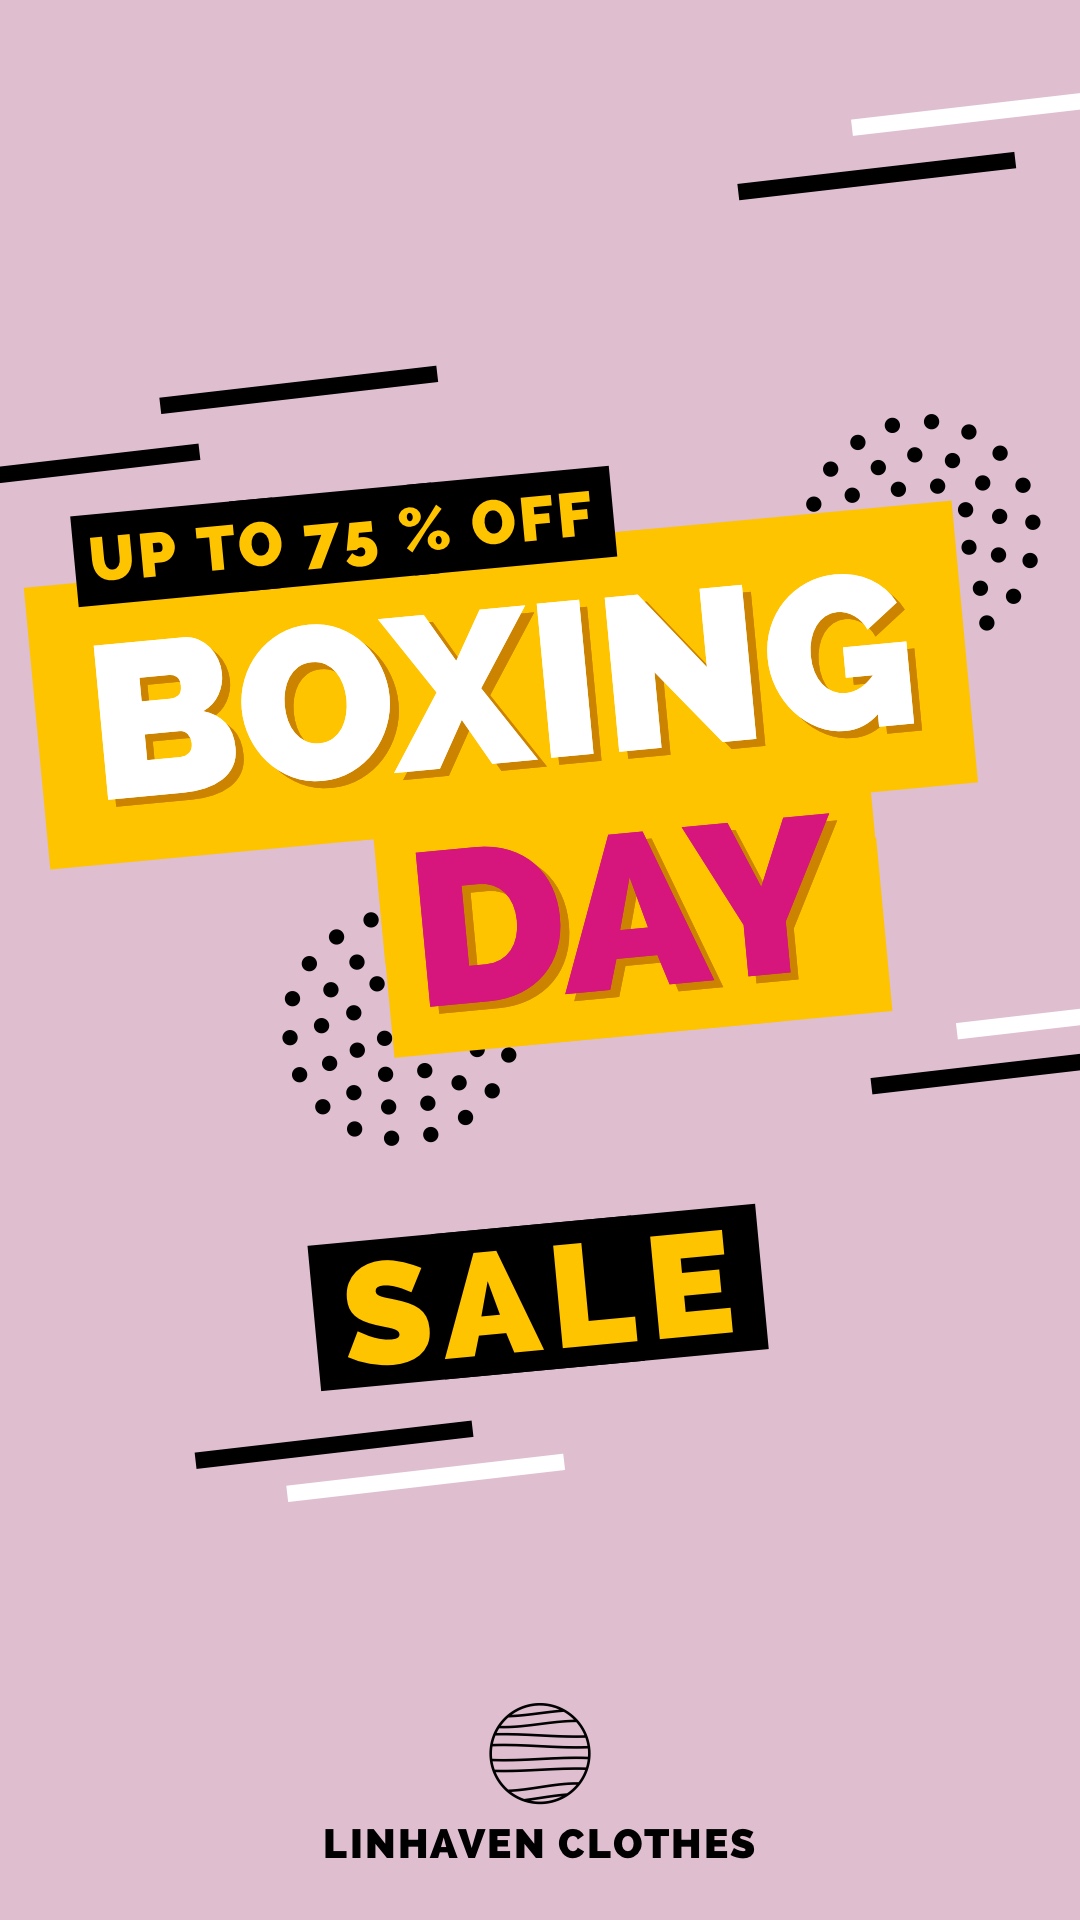 BOXING BOXING DAY SALE UP TO 75 % OFF LINHAVEN CLOTHES